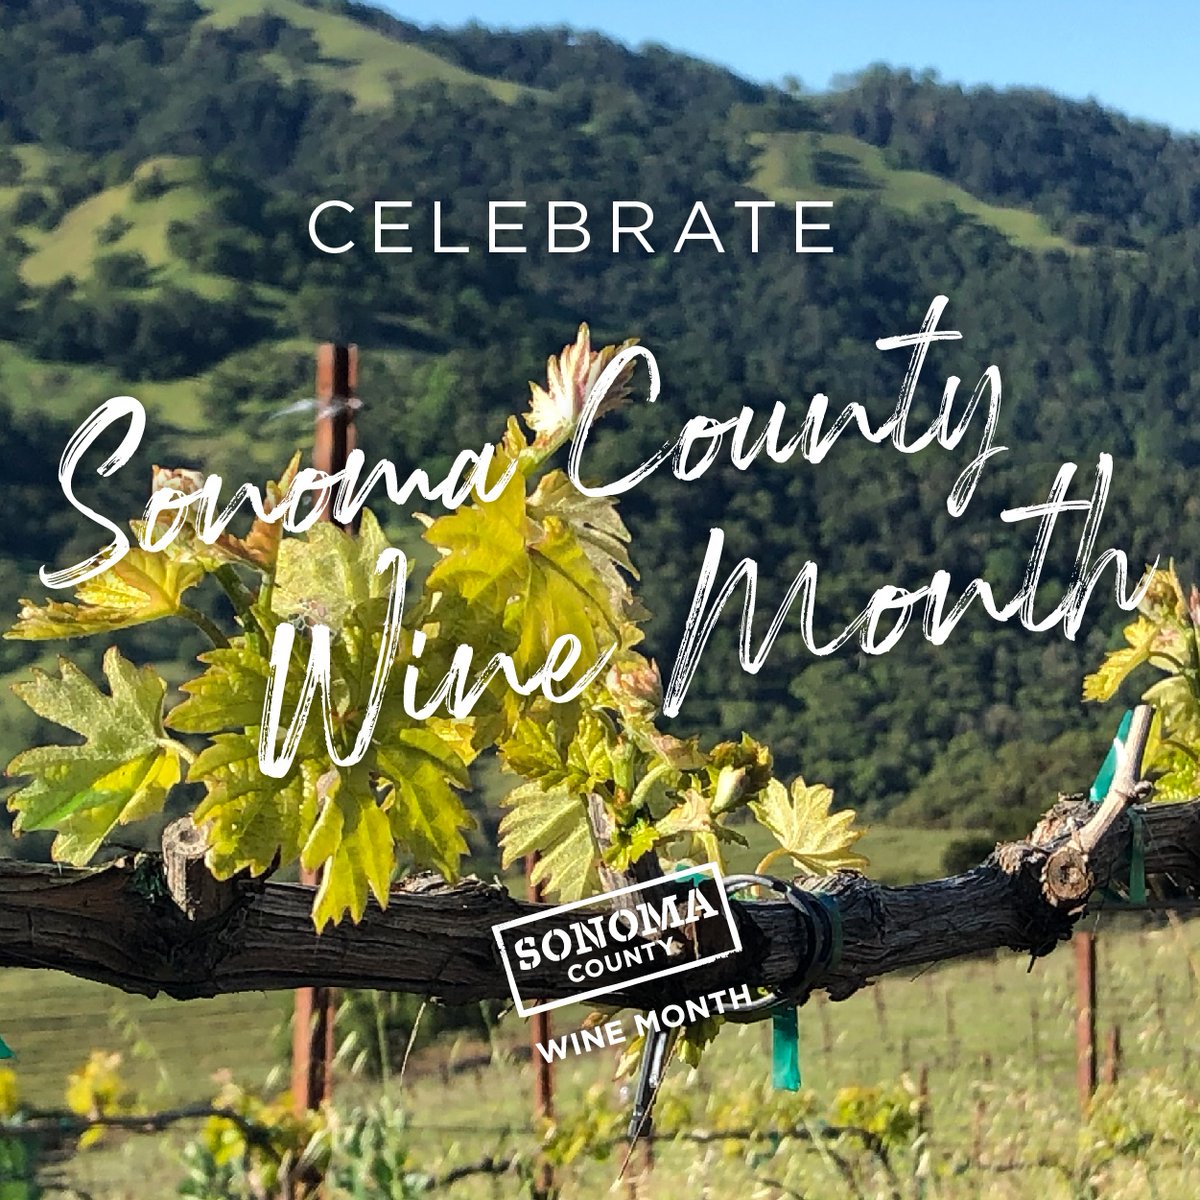 April 1st commences #SonomaCountyWineMonth. #Celebrate with us by enjoying all that our favorite wine country has to offer! #SonomaWine #SipSonoma #Wine #WineCountry #WineMaker #WineTasting #SonomaCounty#Cheers #wineandfood #winelife #winetime #California #Visitca #FoodandWine